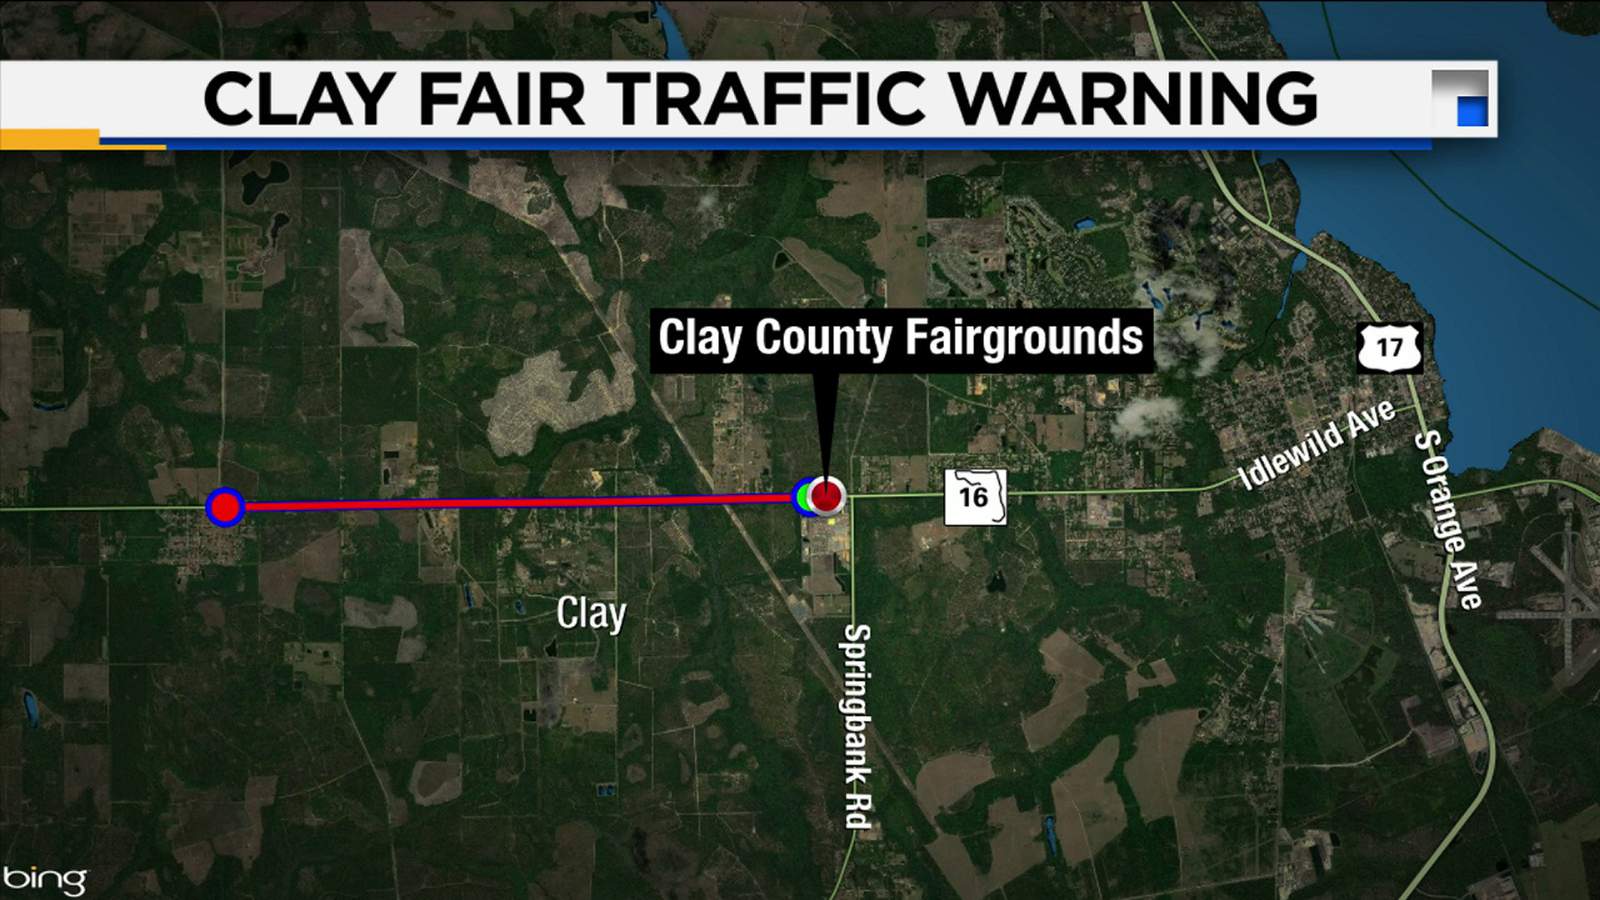 Heading to the Clay County Fair? Traffic delays are expected